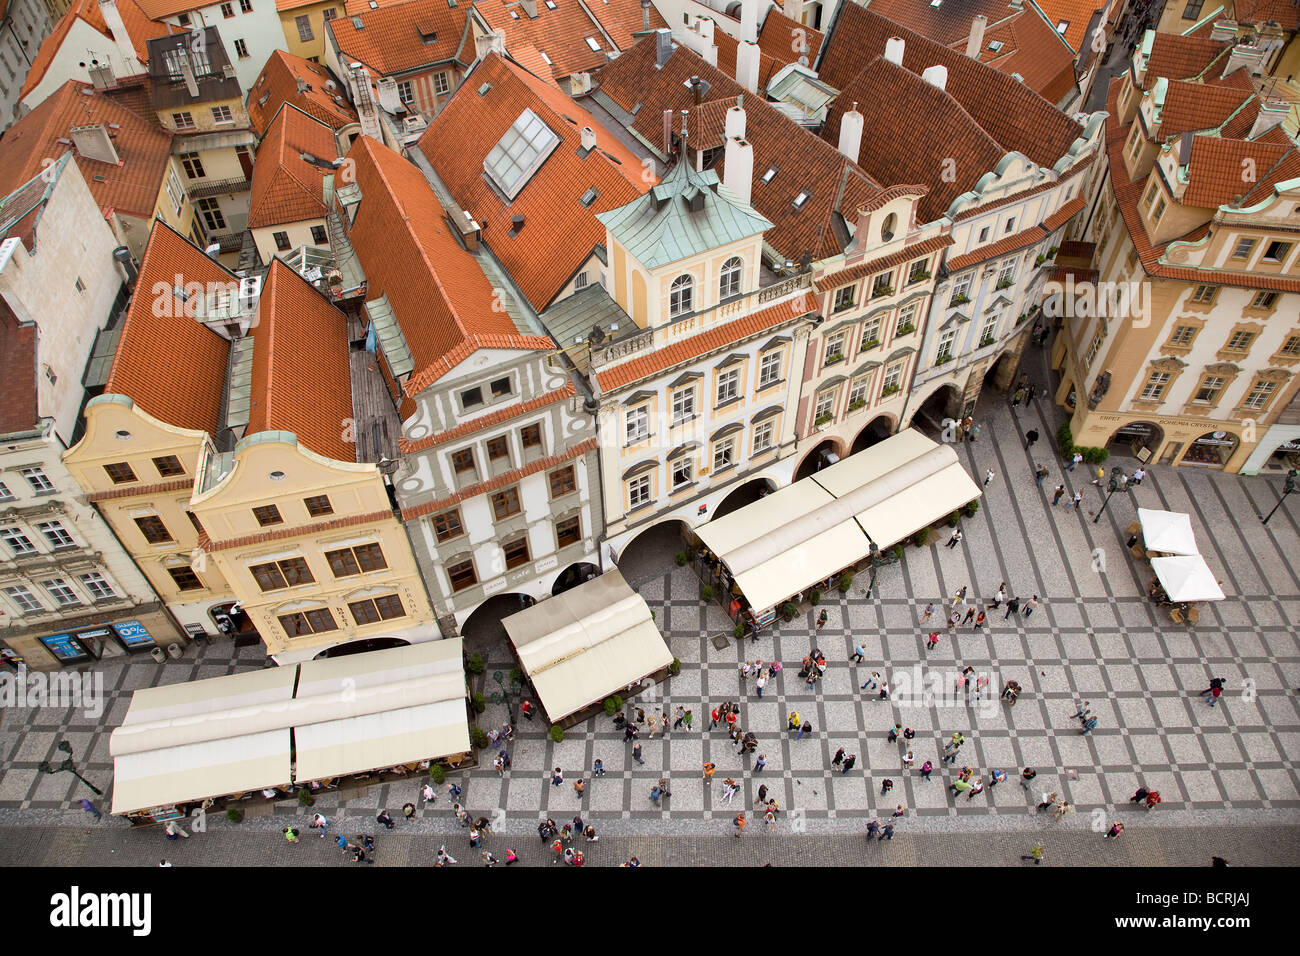 The view from the town hall tower in the old town Prague Czech Republic Staromestske Namesti Stock Photo